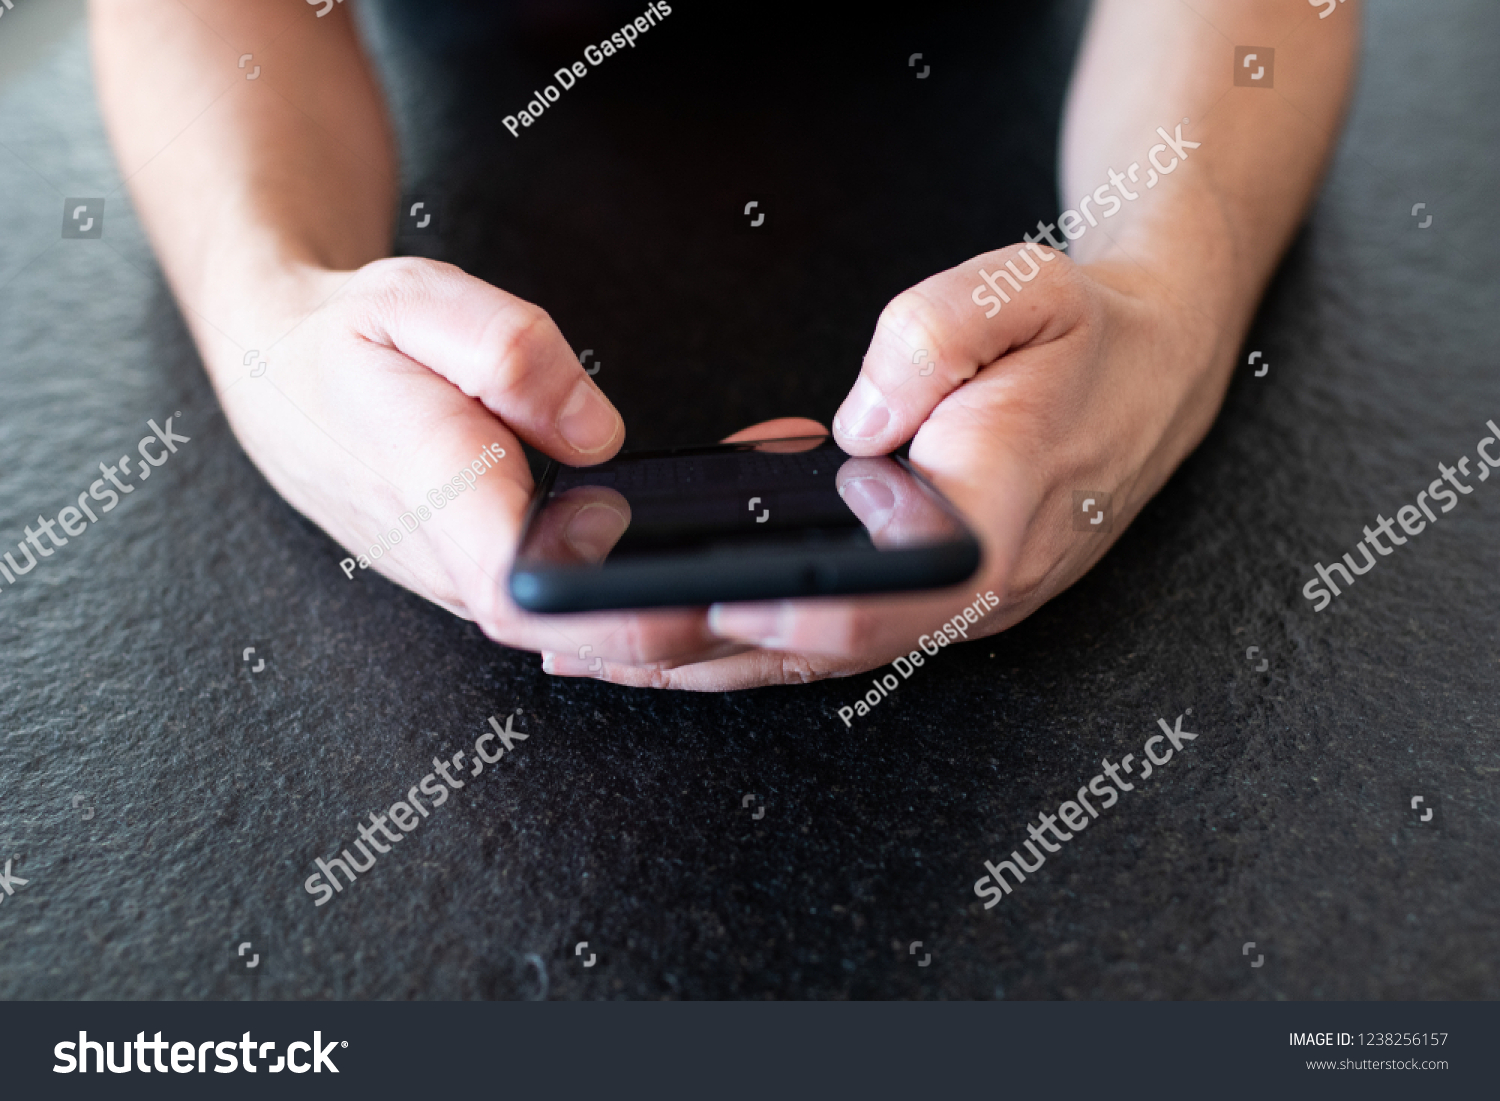 woman's hand using a smartphone to chat on social network with friends. Finger tapping on touch screen, using smartphone on a black granite table at the coffee desk #1238256157